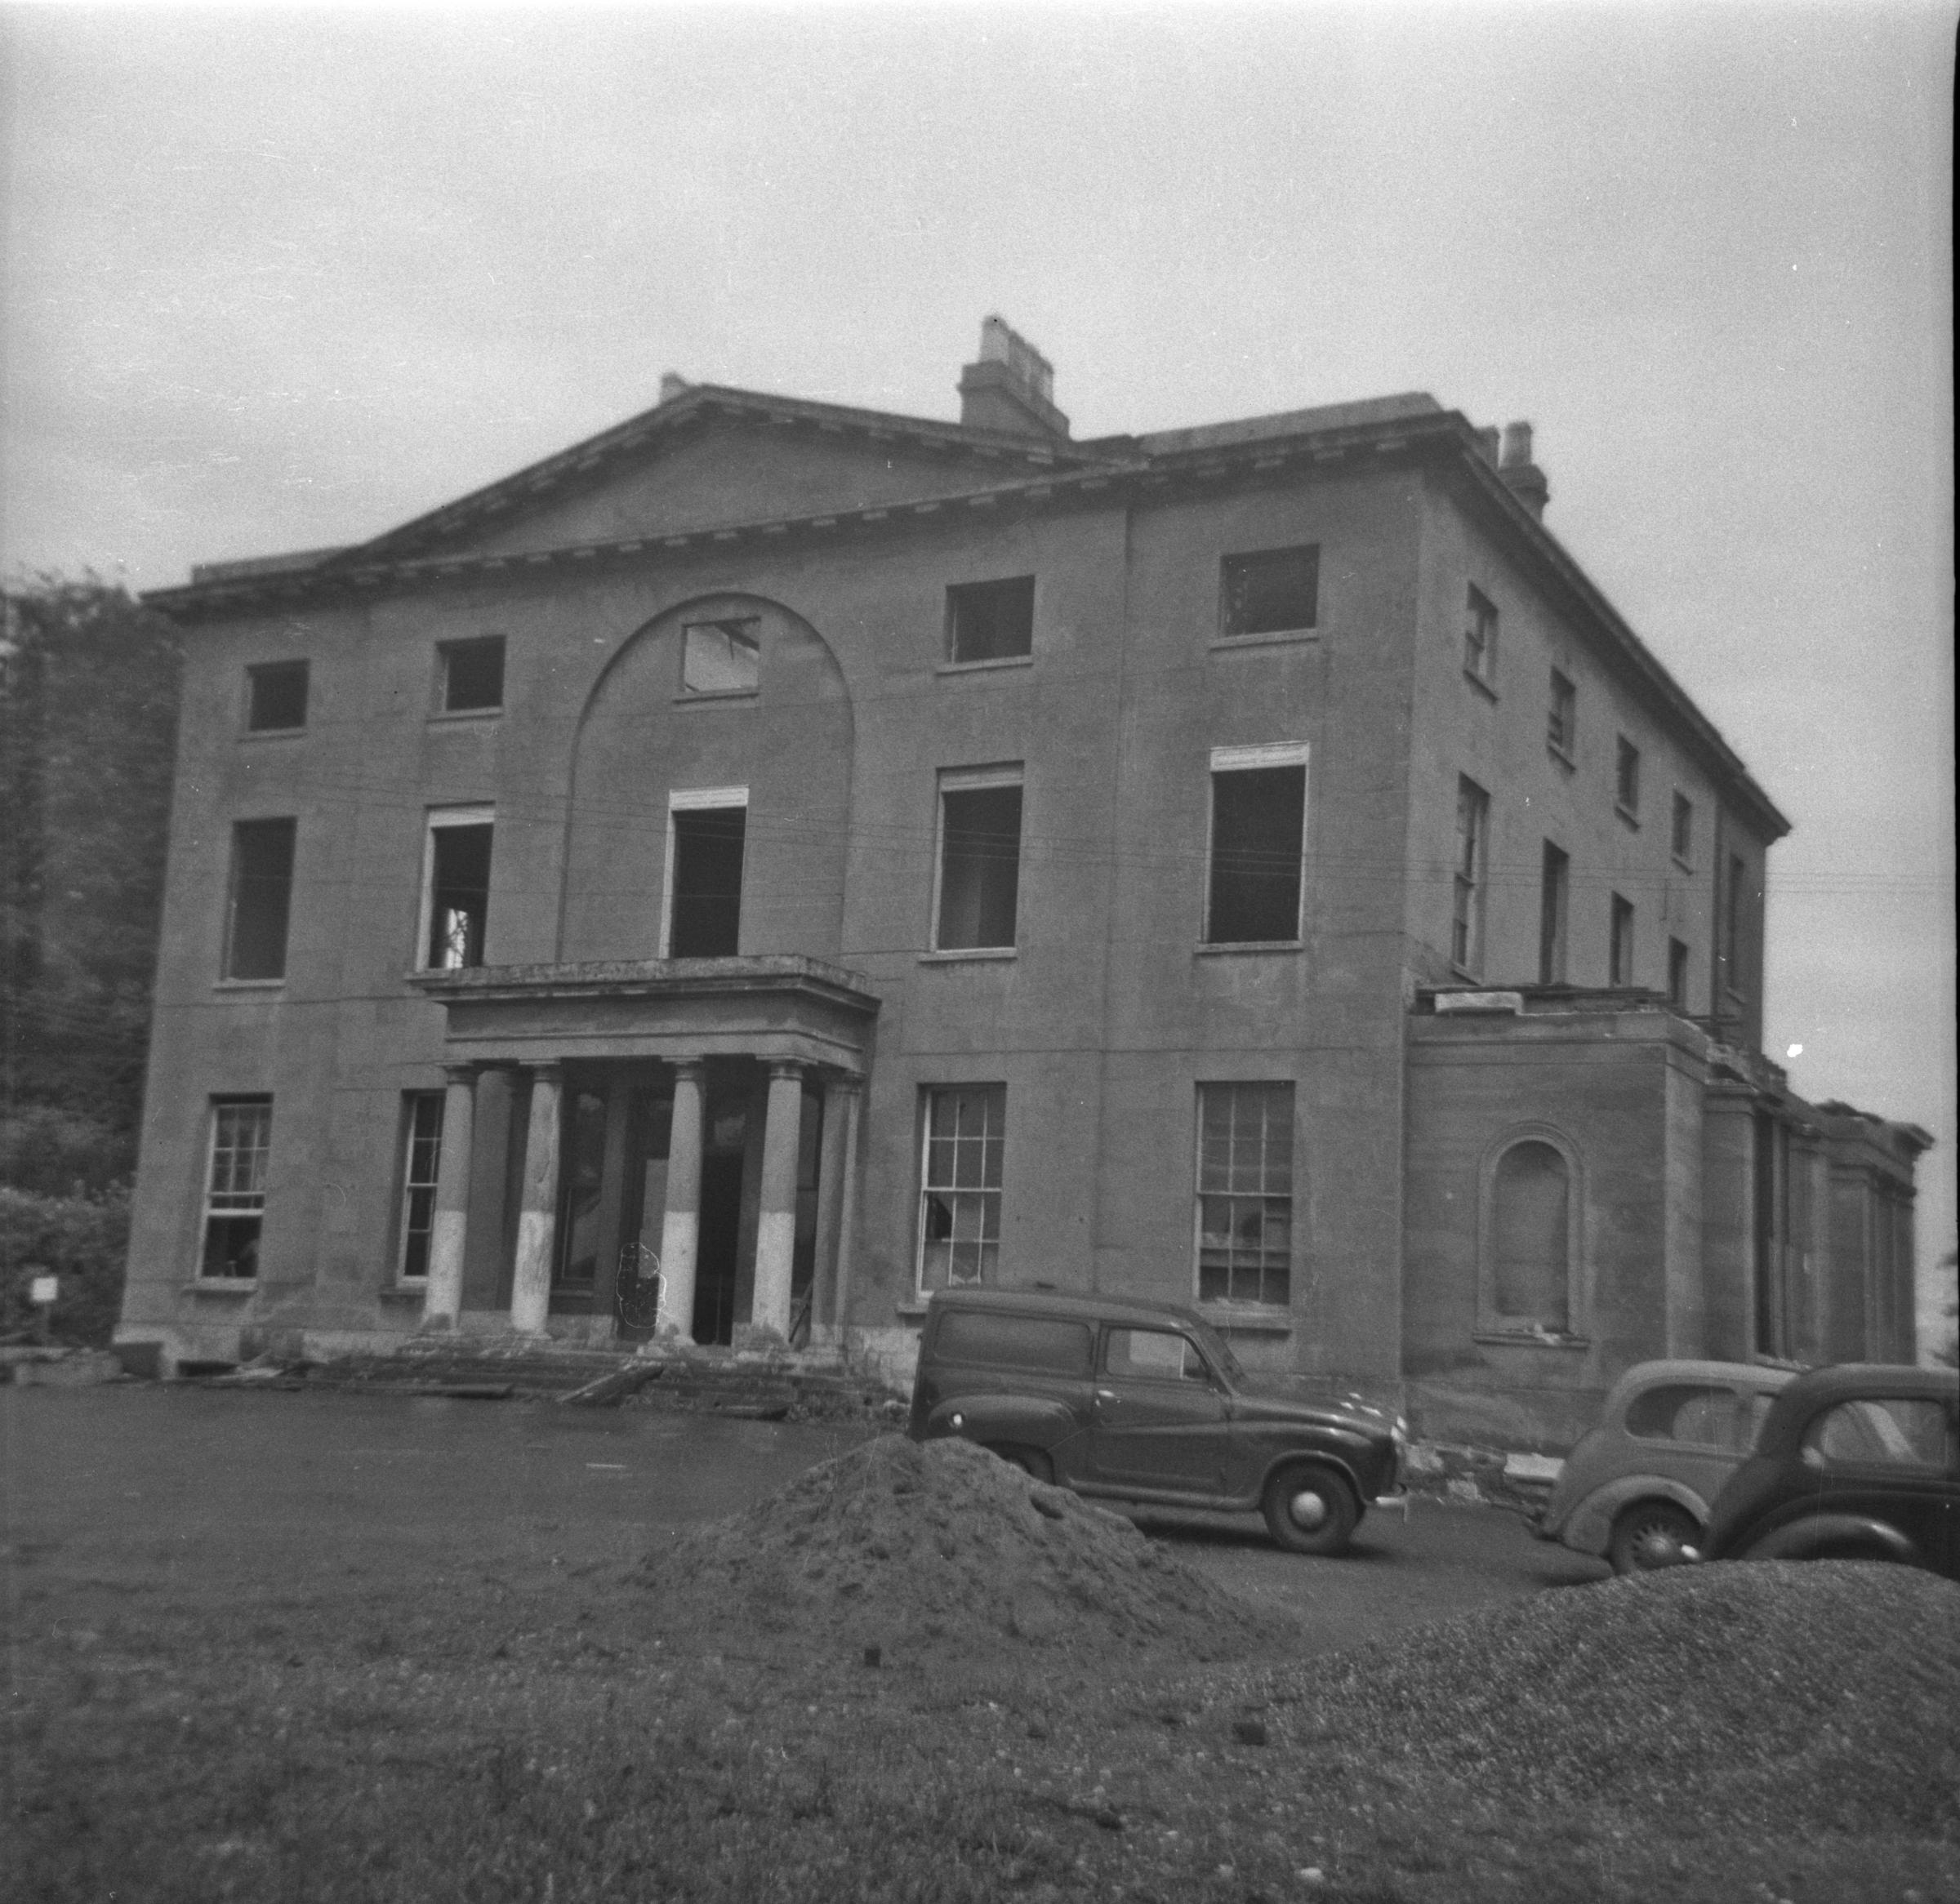 The 18th-century Perdiswell Hall, shortly before demolition in the 1950s, but during the war years, headquarters to RAF No 2 Elementary Flight Training School